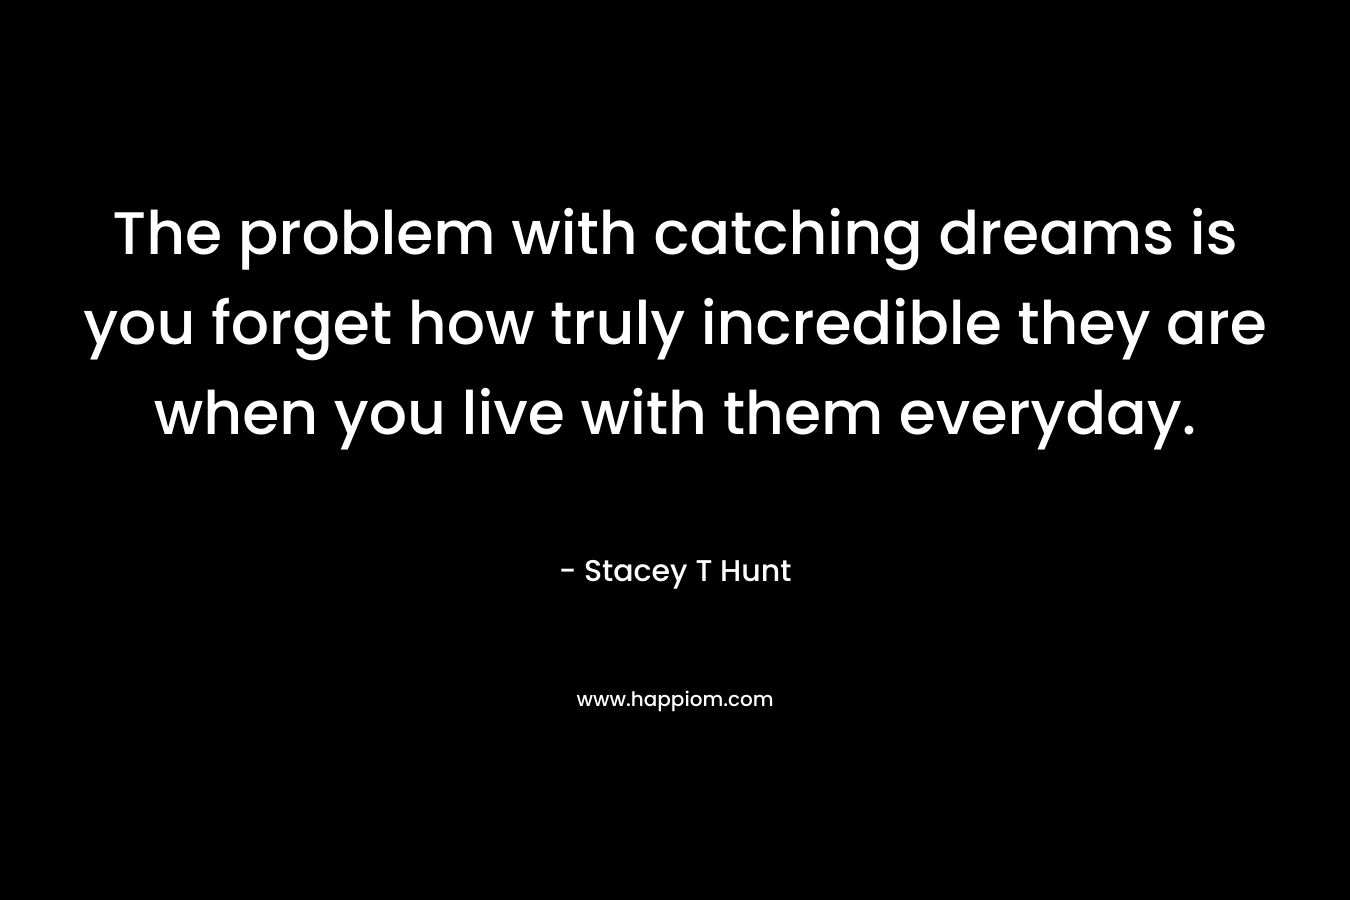 The problem with catching dreams is you forget how truly incredible they are when you live with them everyday. – Stacey T Hunt